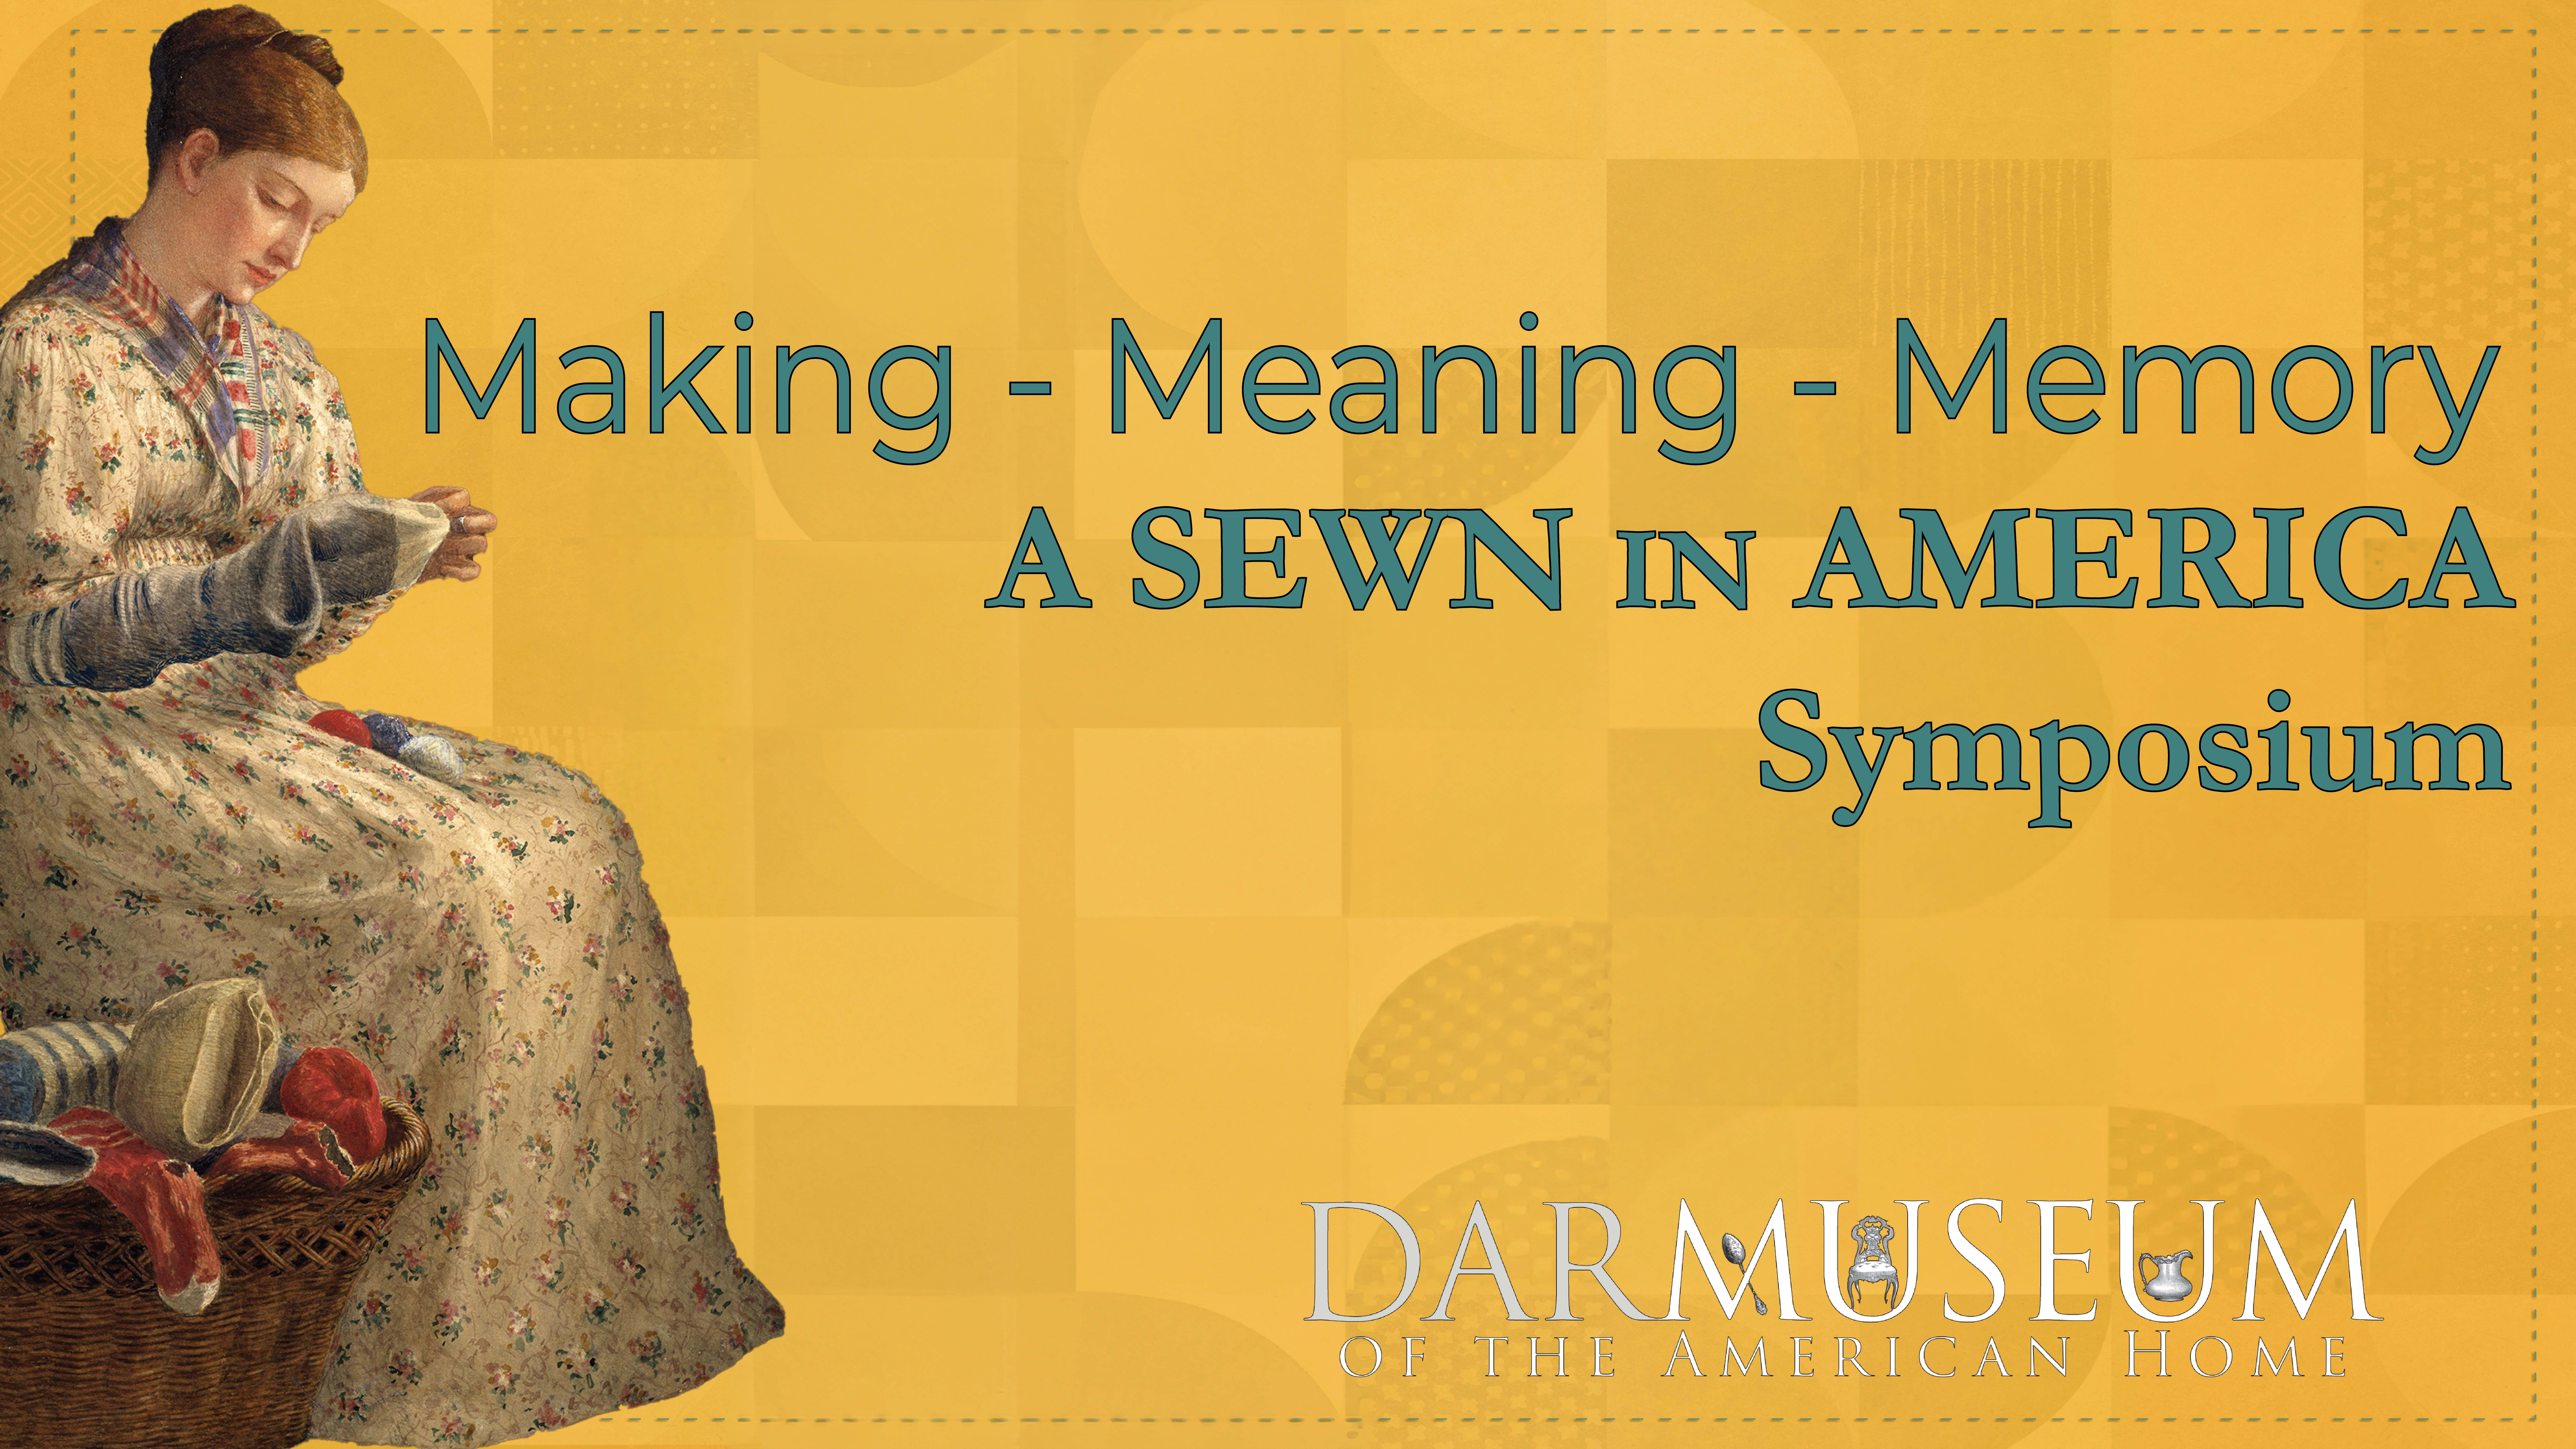 Making - Meaning - Memory A Sewn in America Synmposium poster with a yellow background and lady from the 18th century sewing 